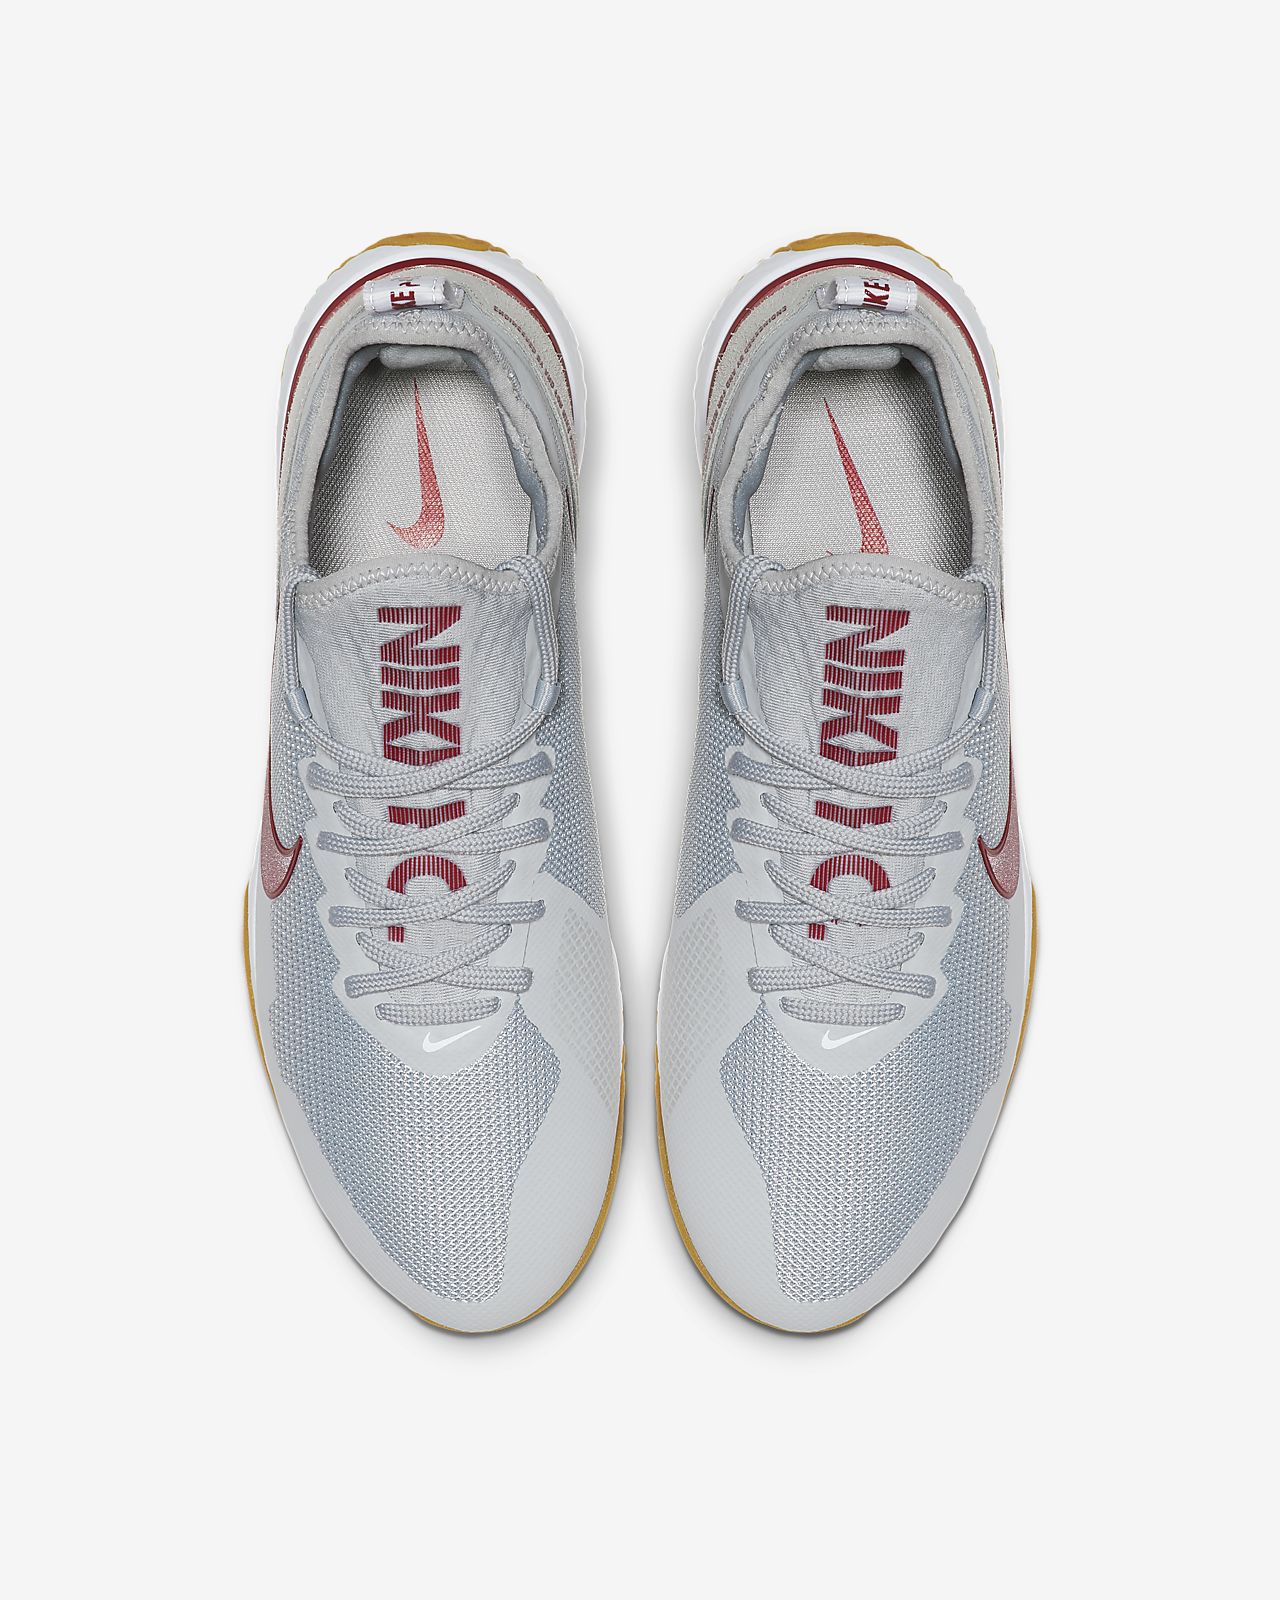 roller Writer channel Nike F.C. React - Wolf Grey / White / Gum Light Brown / Noble Red -  Football Shirt Culture - Latest Football Kit News and More